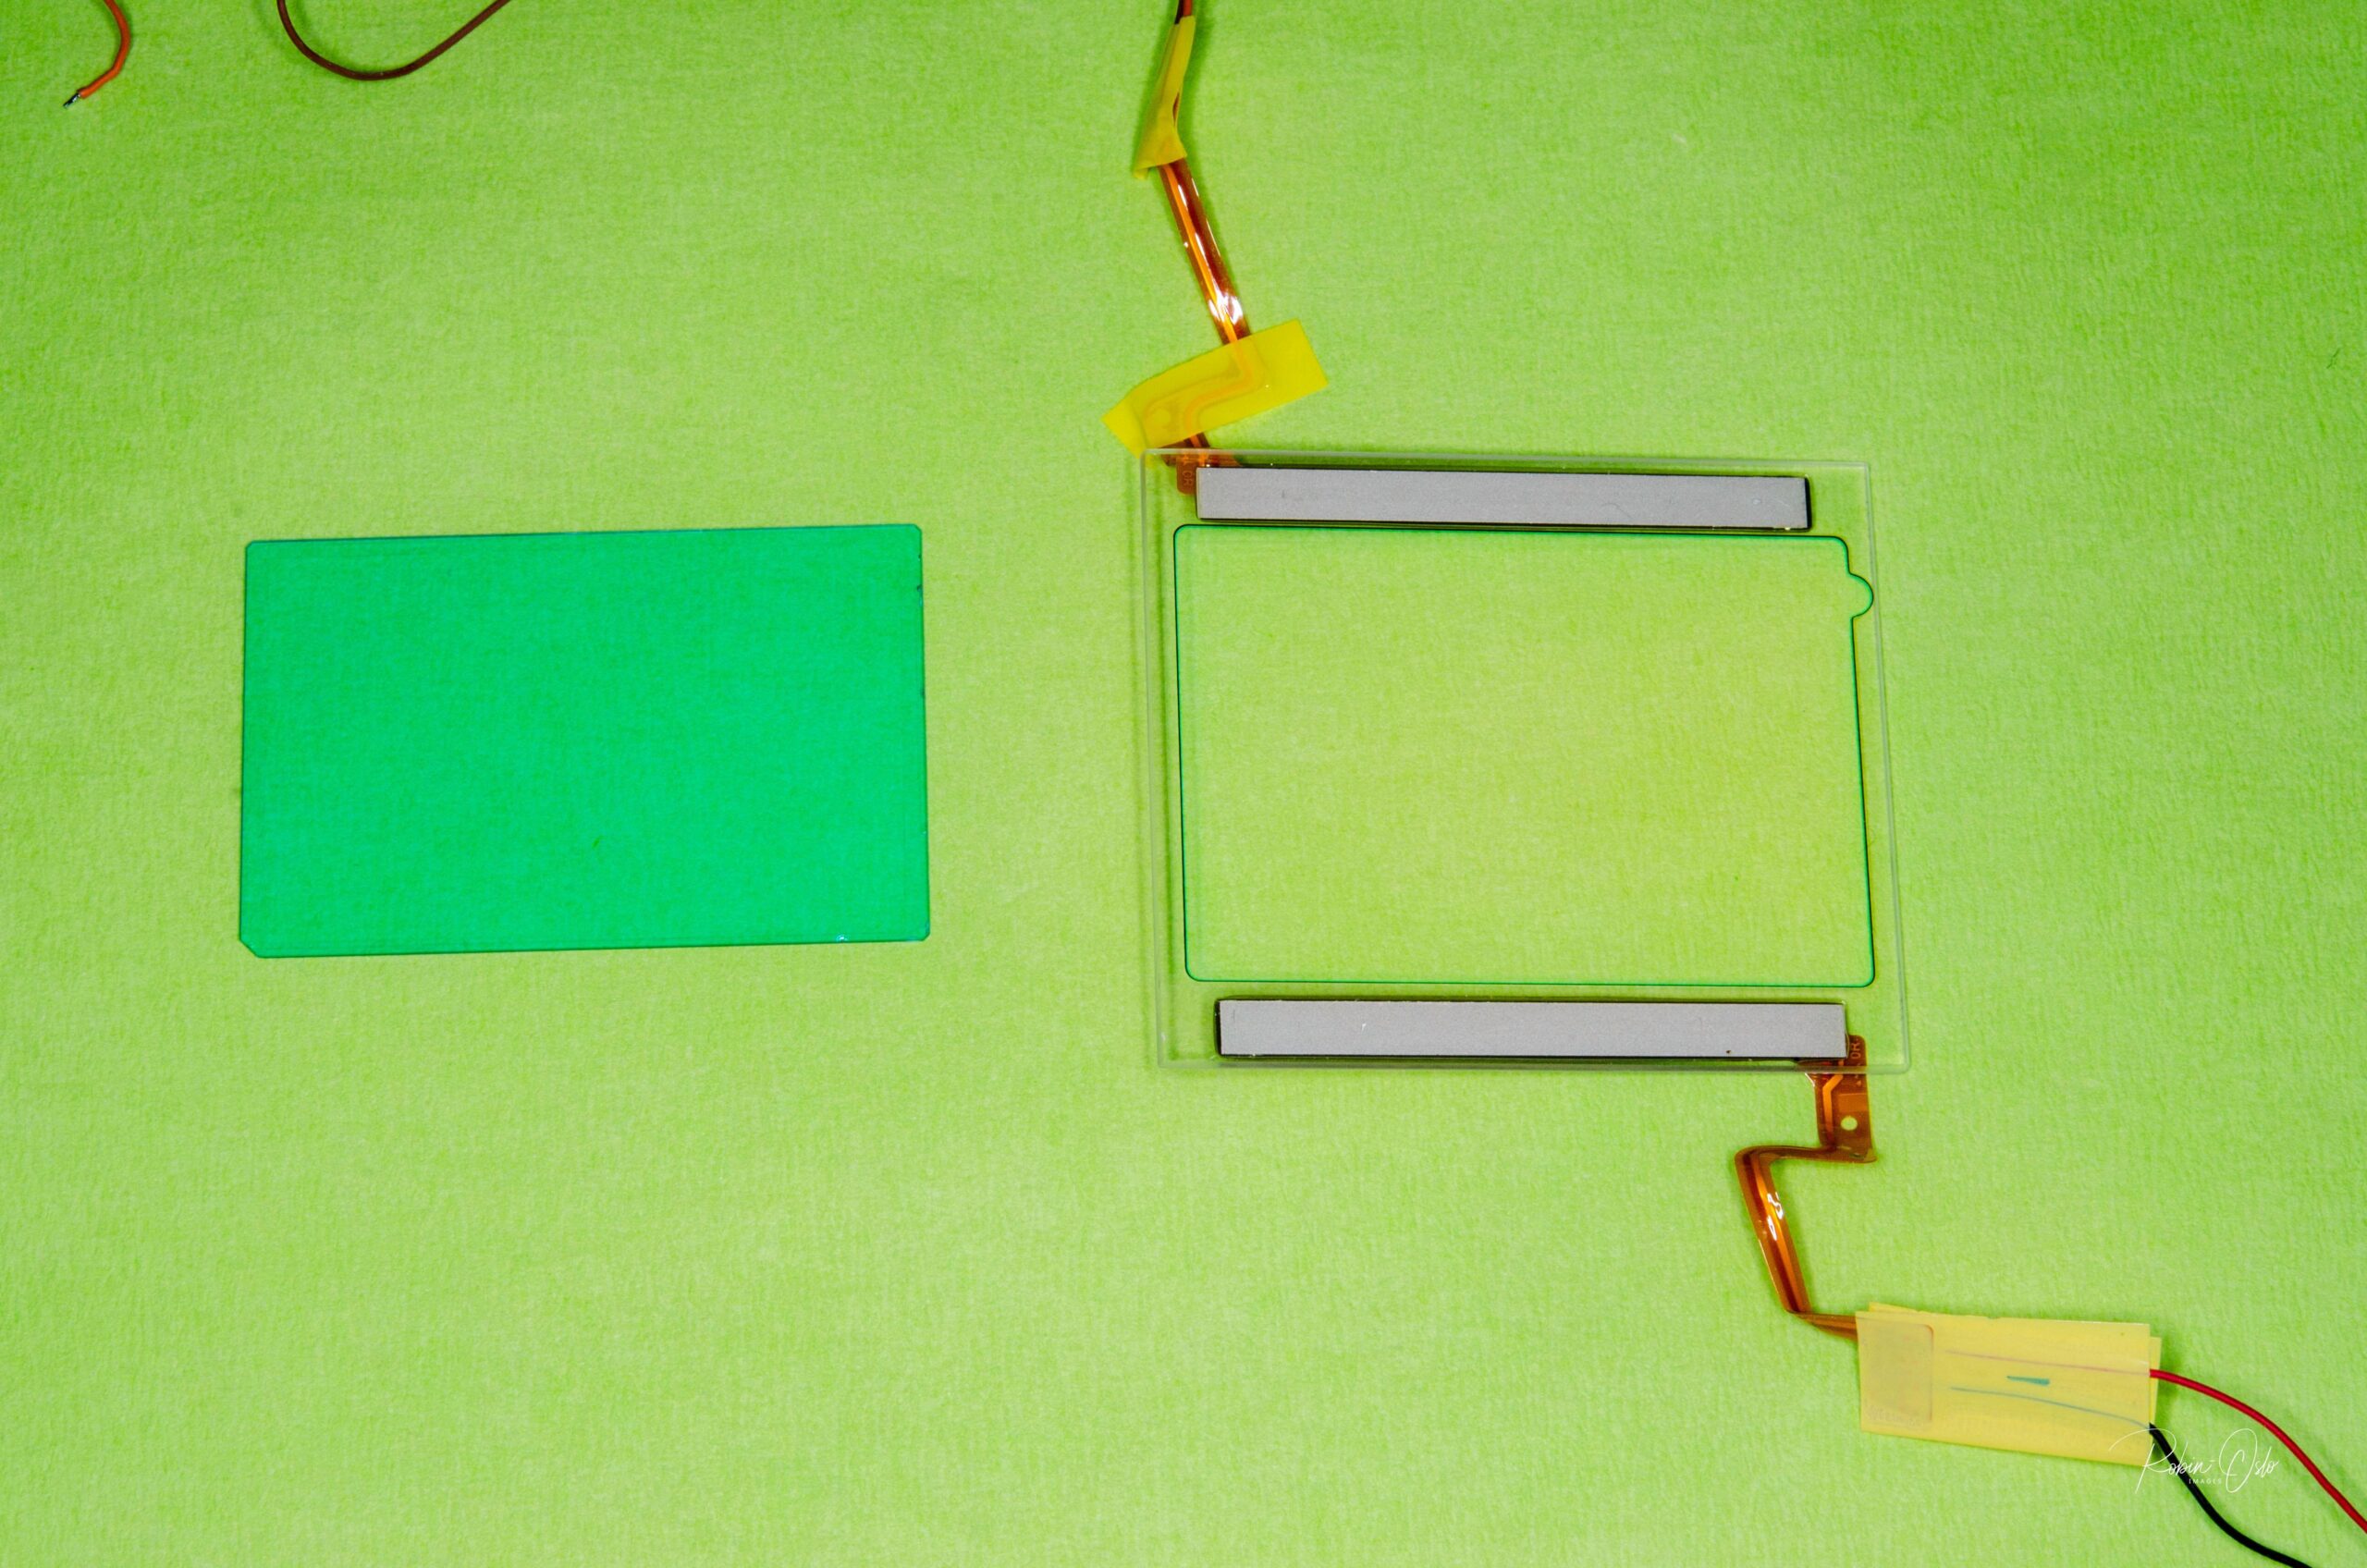 The disassembled filters, on the left the blocking filter, on the right the dust filter in front of the blocking filter.